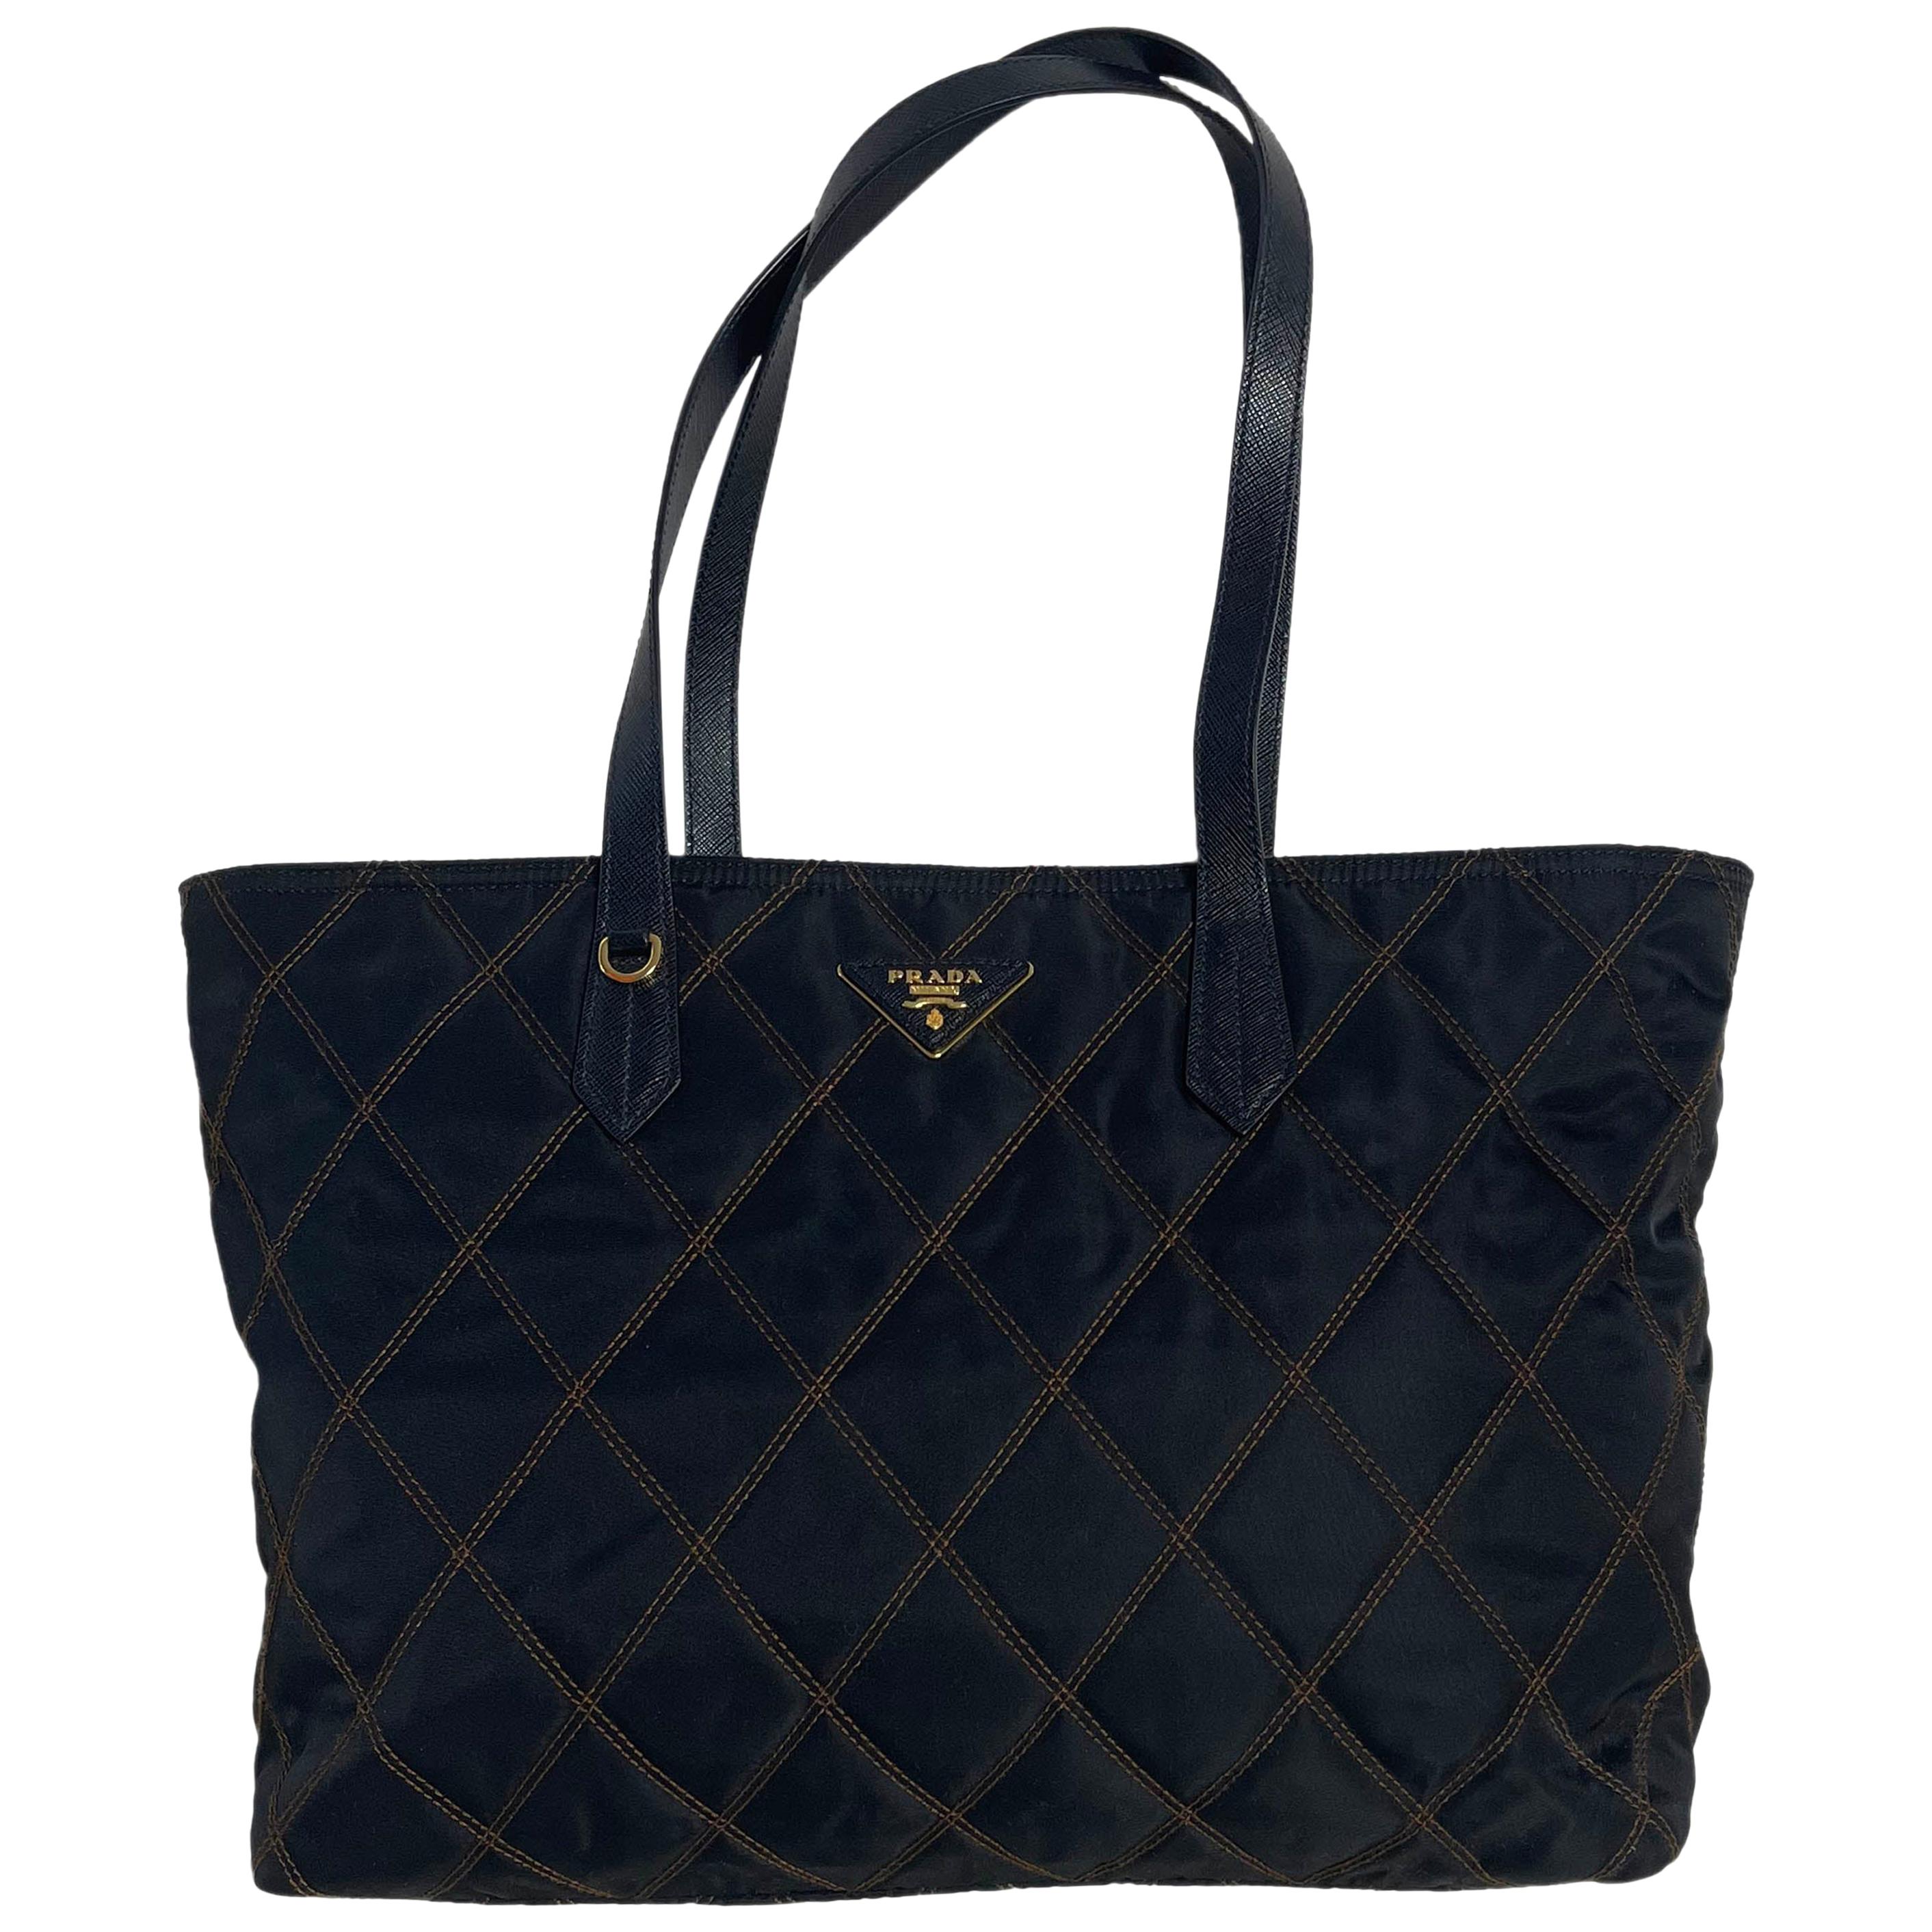 Prada Navy Nylon Quilted Tote Bag w/ Contrast Stitching rt. $1, 170